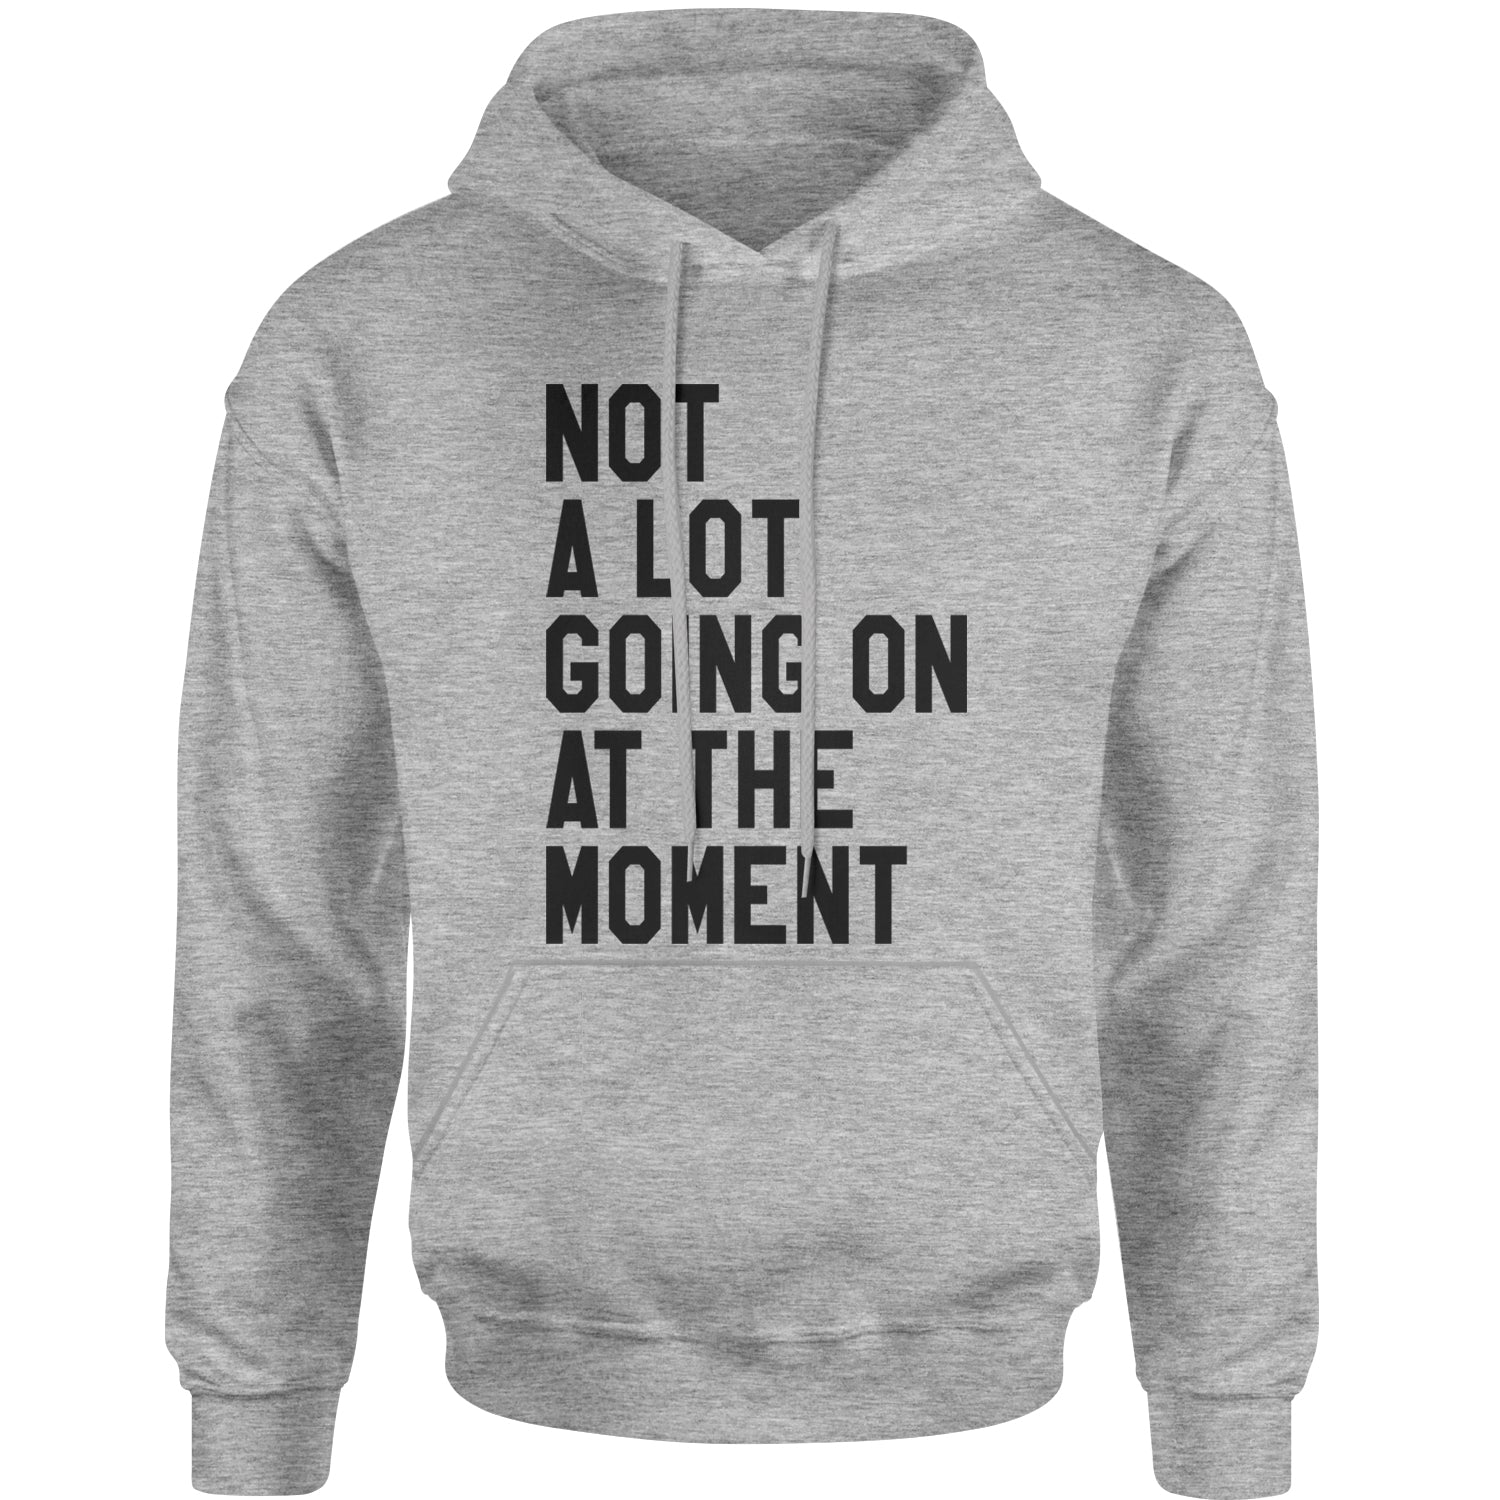 NOT A Lot Going On At The Moment Feeling 22 Adult Hoodie Sweatshirt